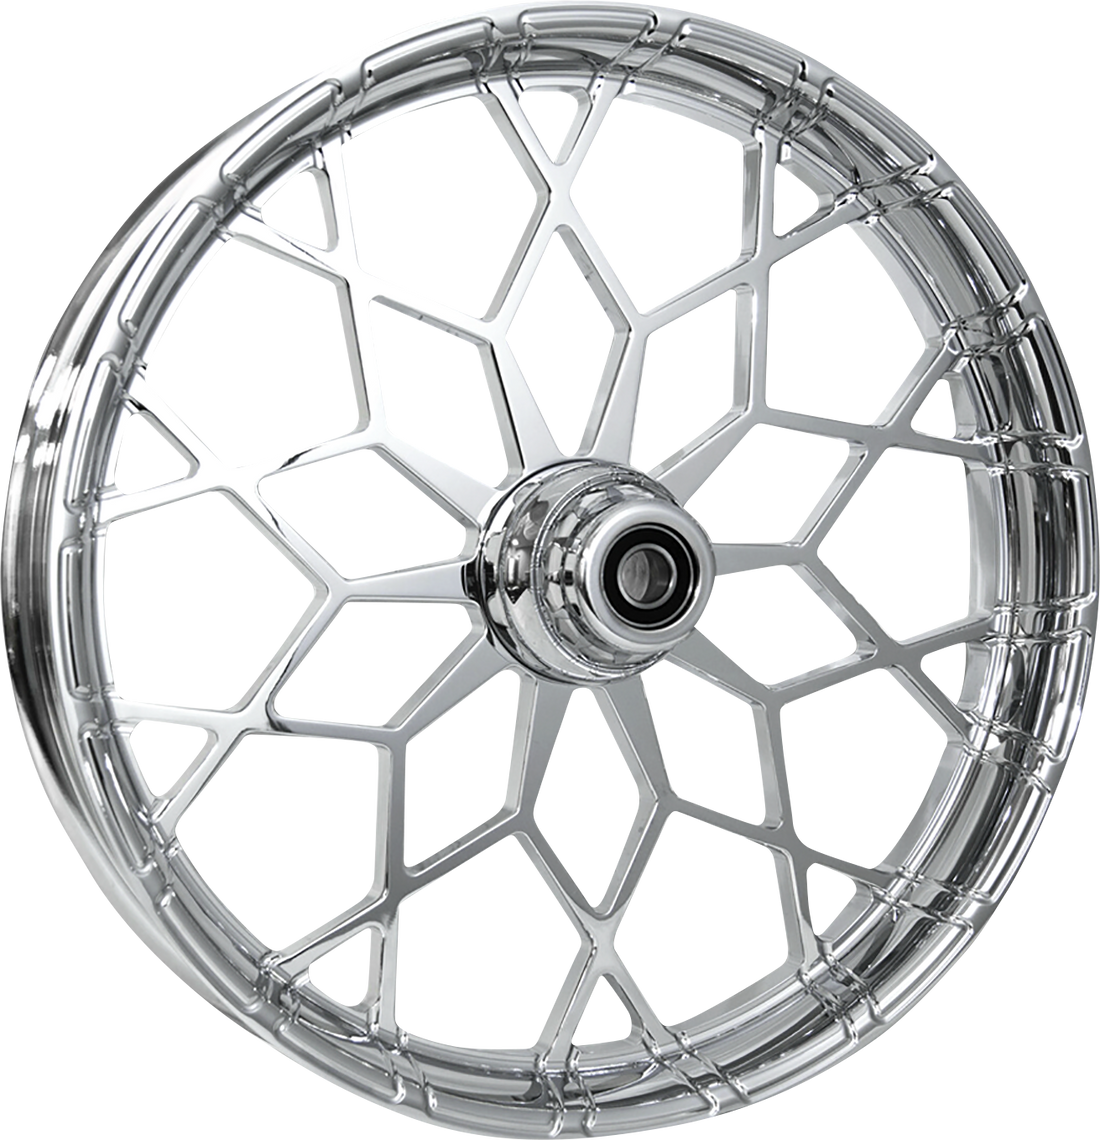 0213-0877 - RC COMPONENTS Wheel - Phenom - Front - Dual Disc - No ABS - Chrome - 21"x3.50" - FLH 213HD031NON135C